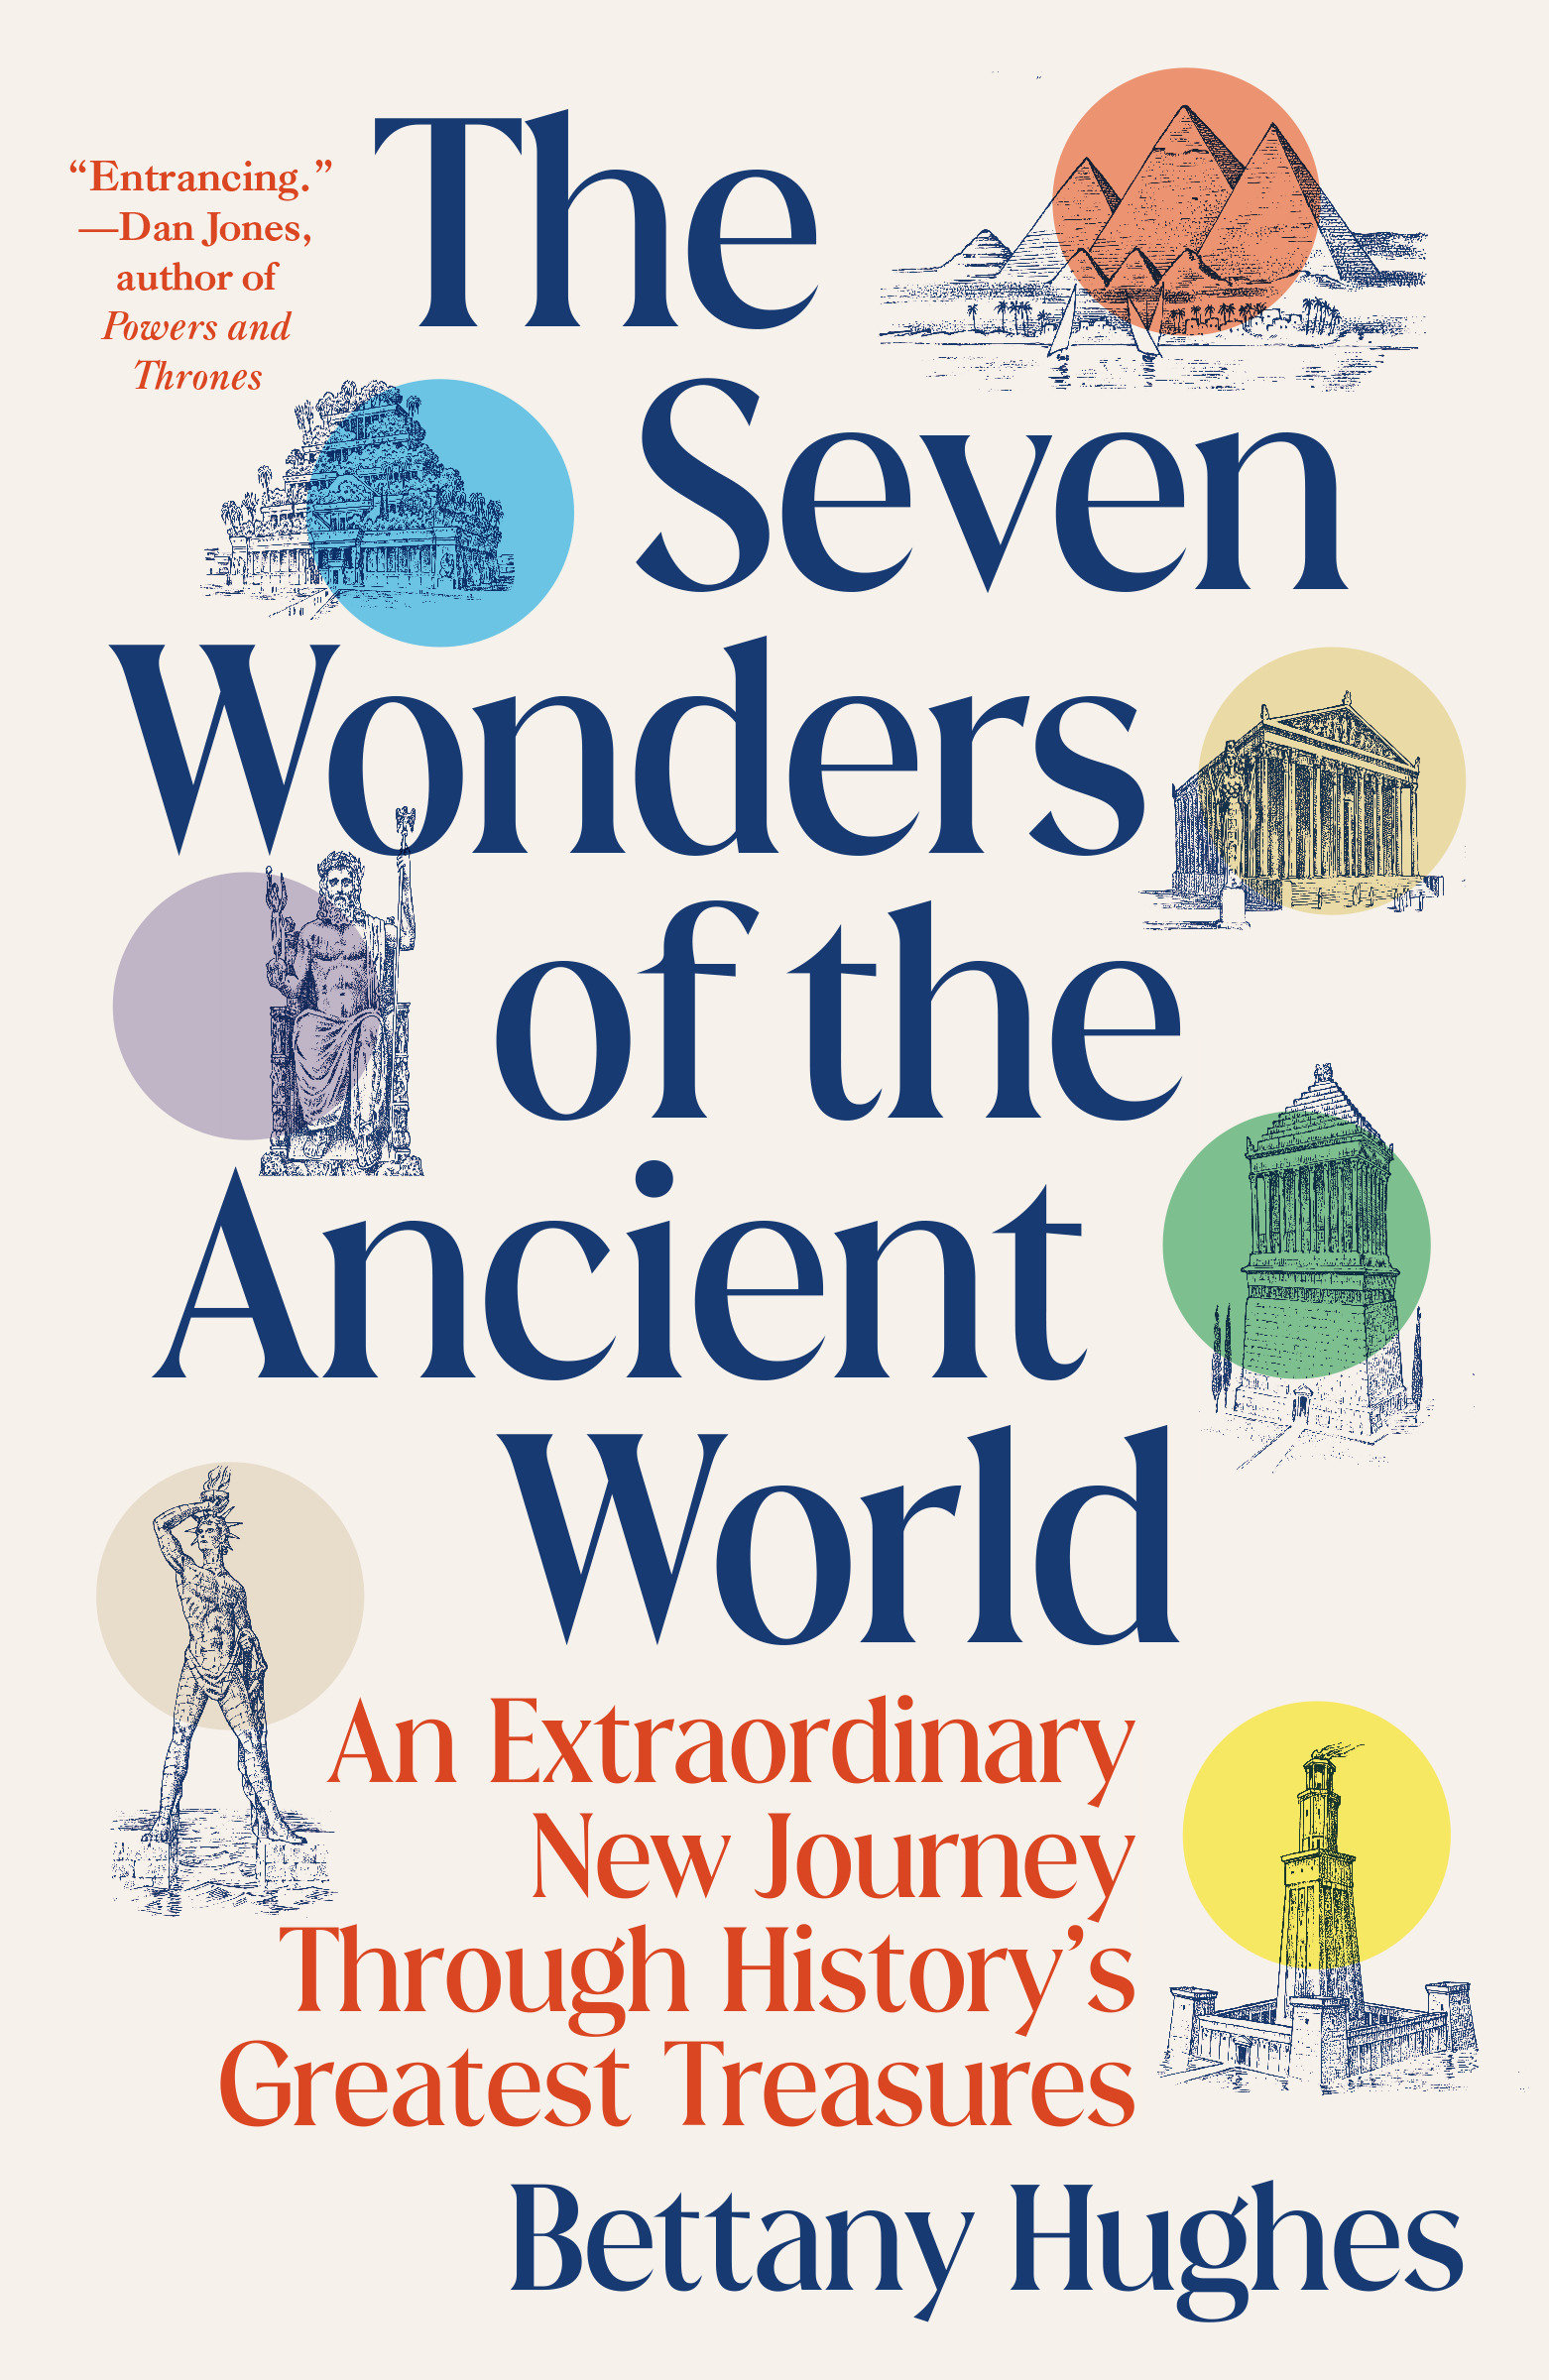 The Seven Wonders of the Ancient World An Extraordinary New Journey Through History's Greatest Treasures cover image